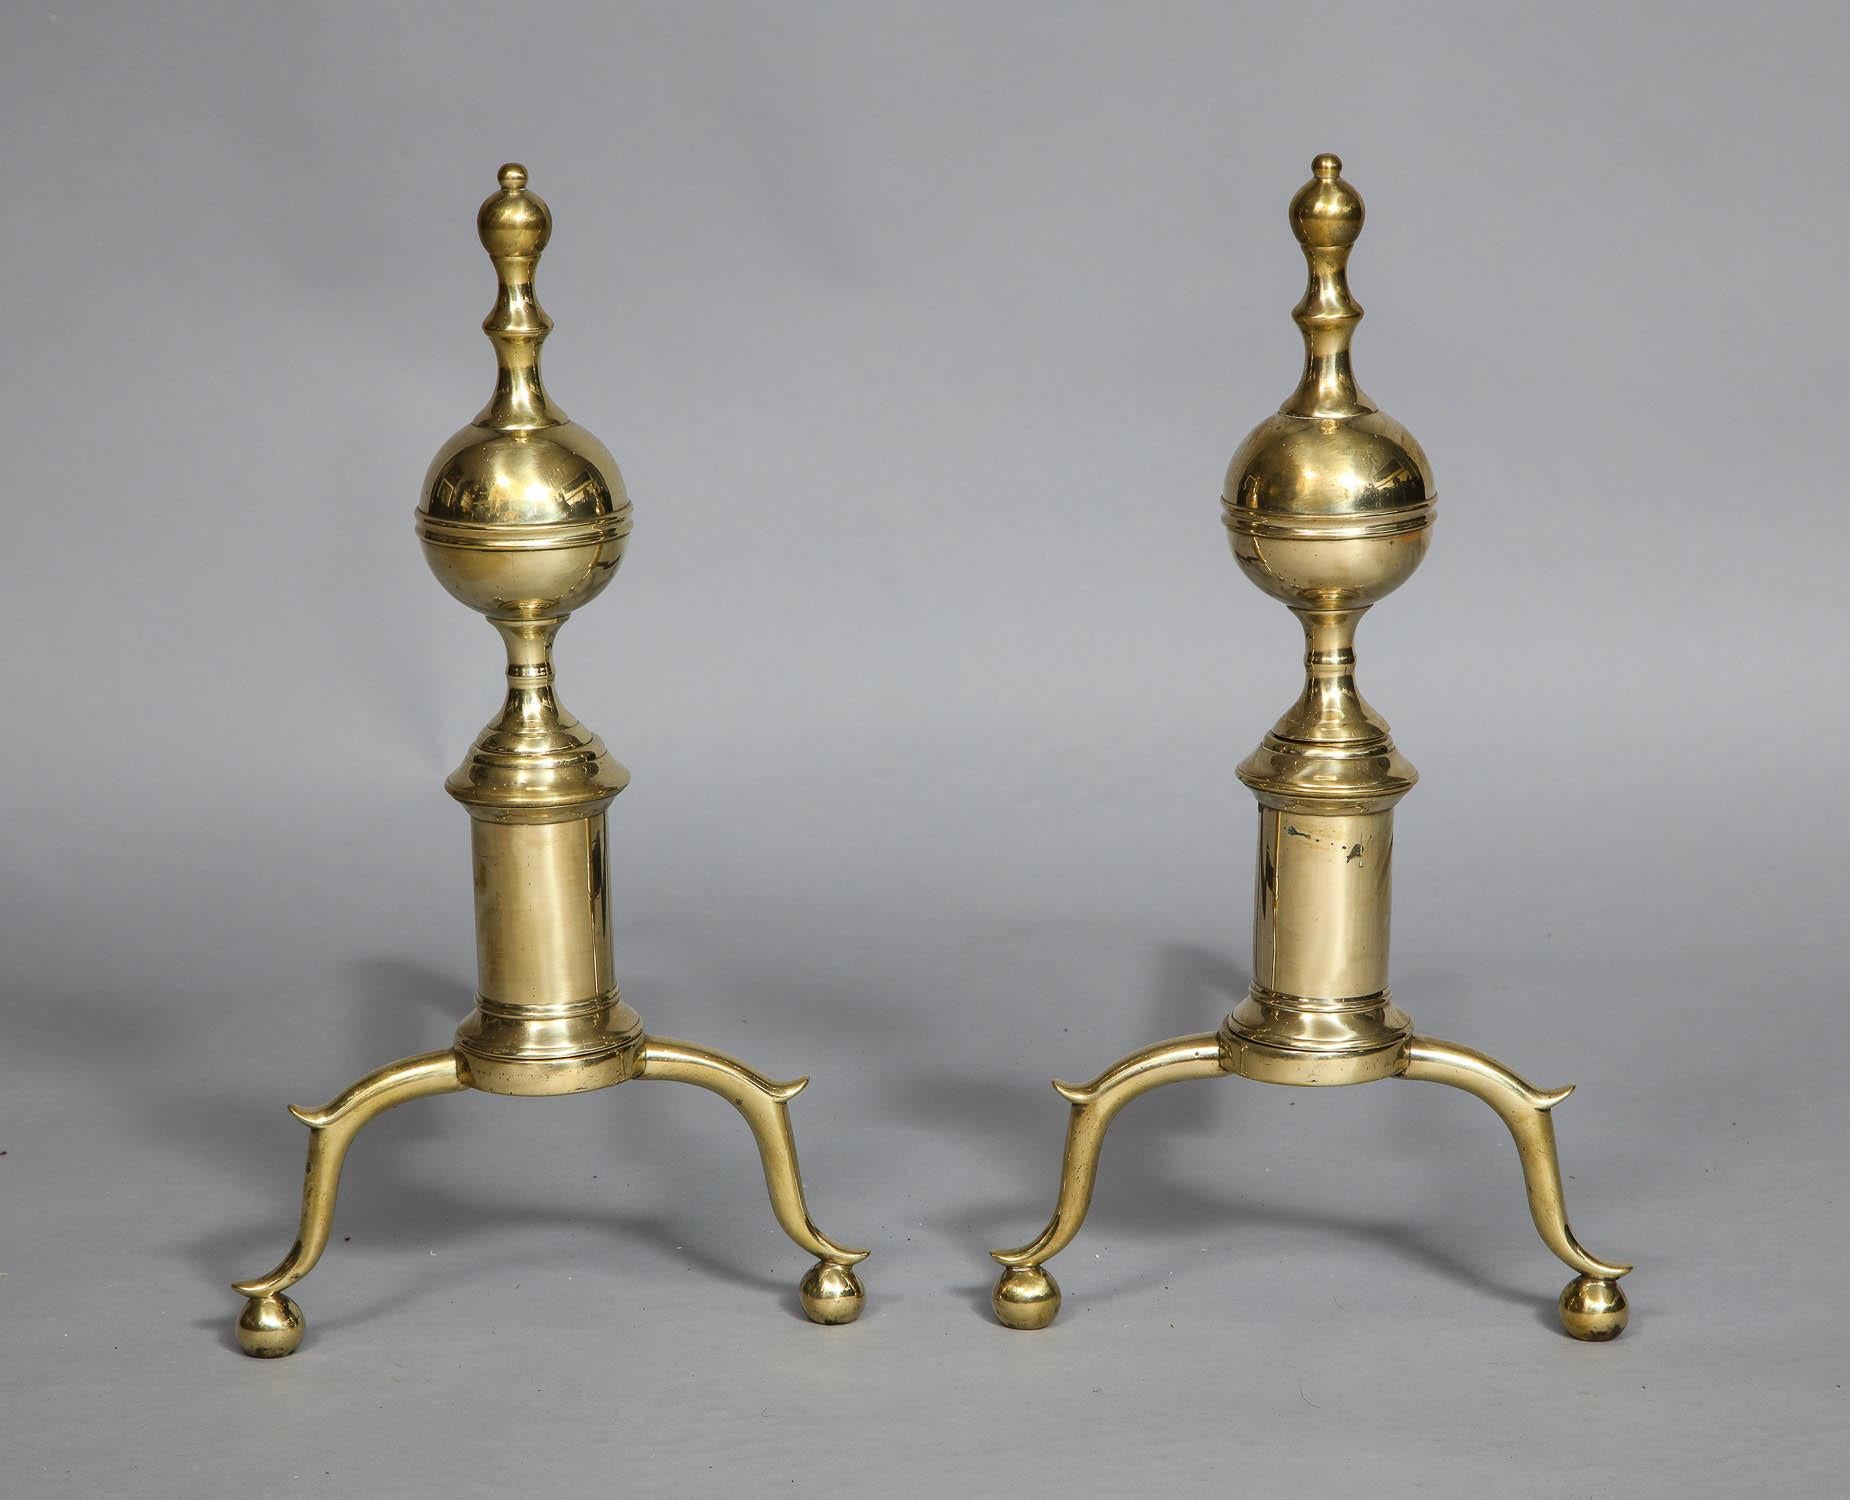 Fine pair of late 18th century brass andirons with turret finials over banded ball tops standing on ring turned collars on cylindrical shafts, standing on ball feet below spurred legs.